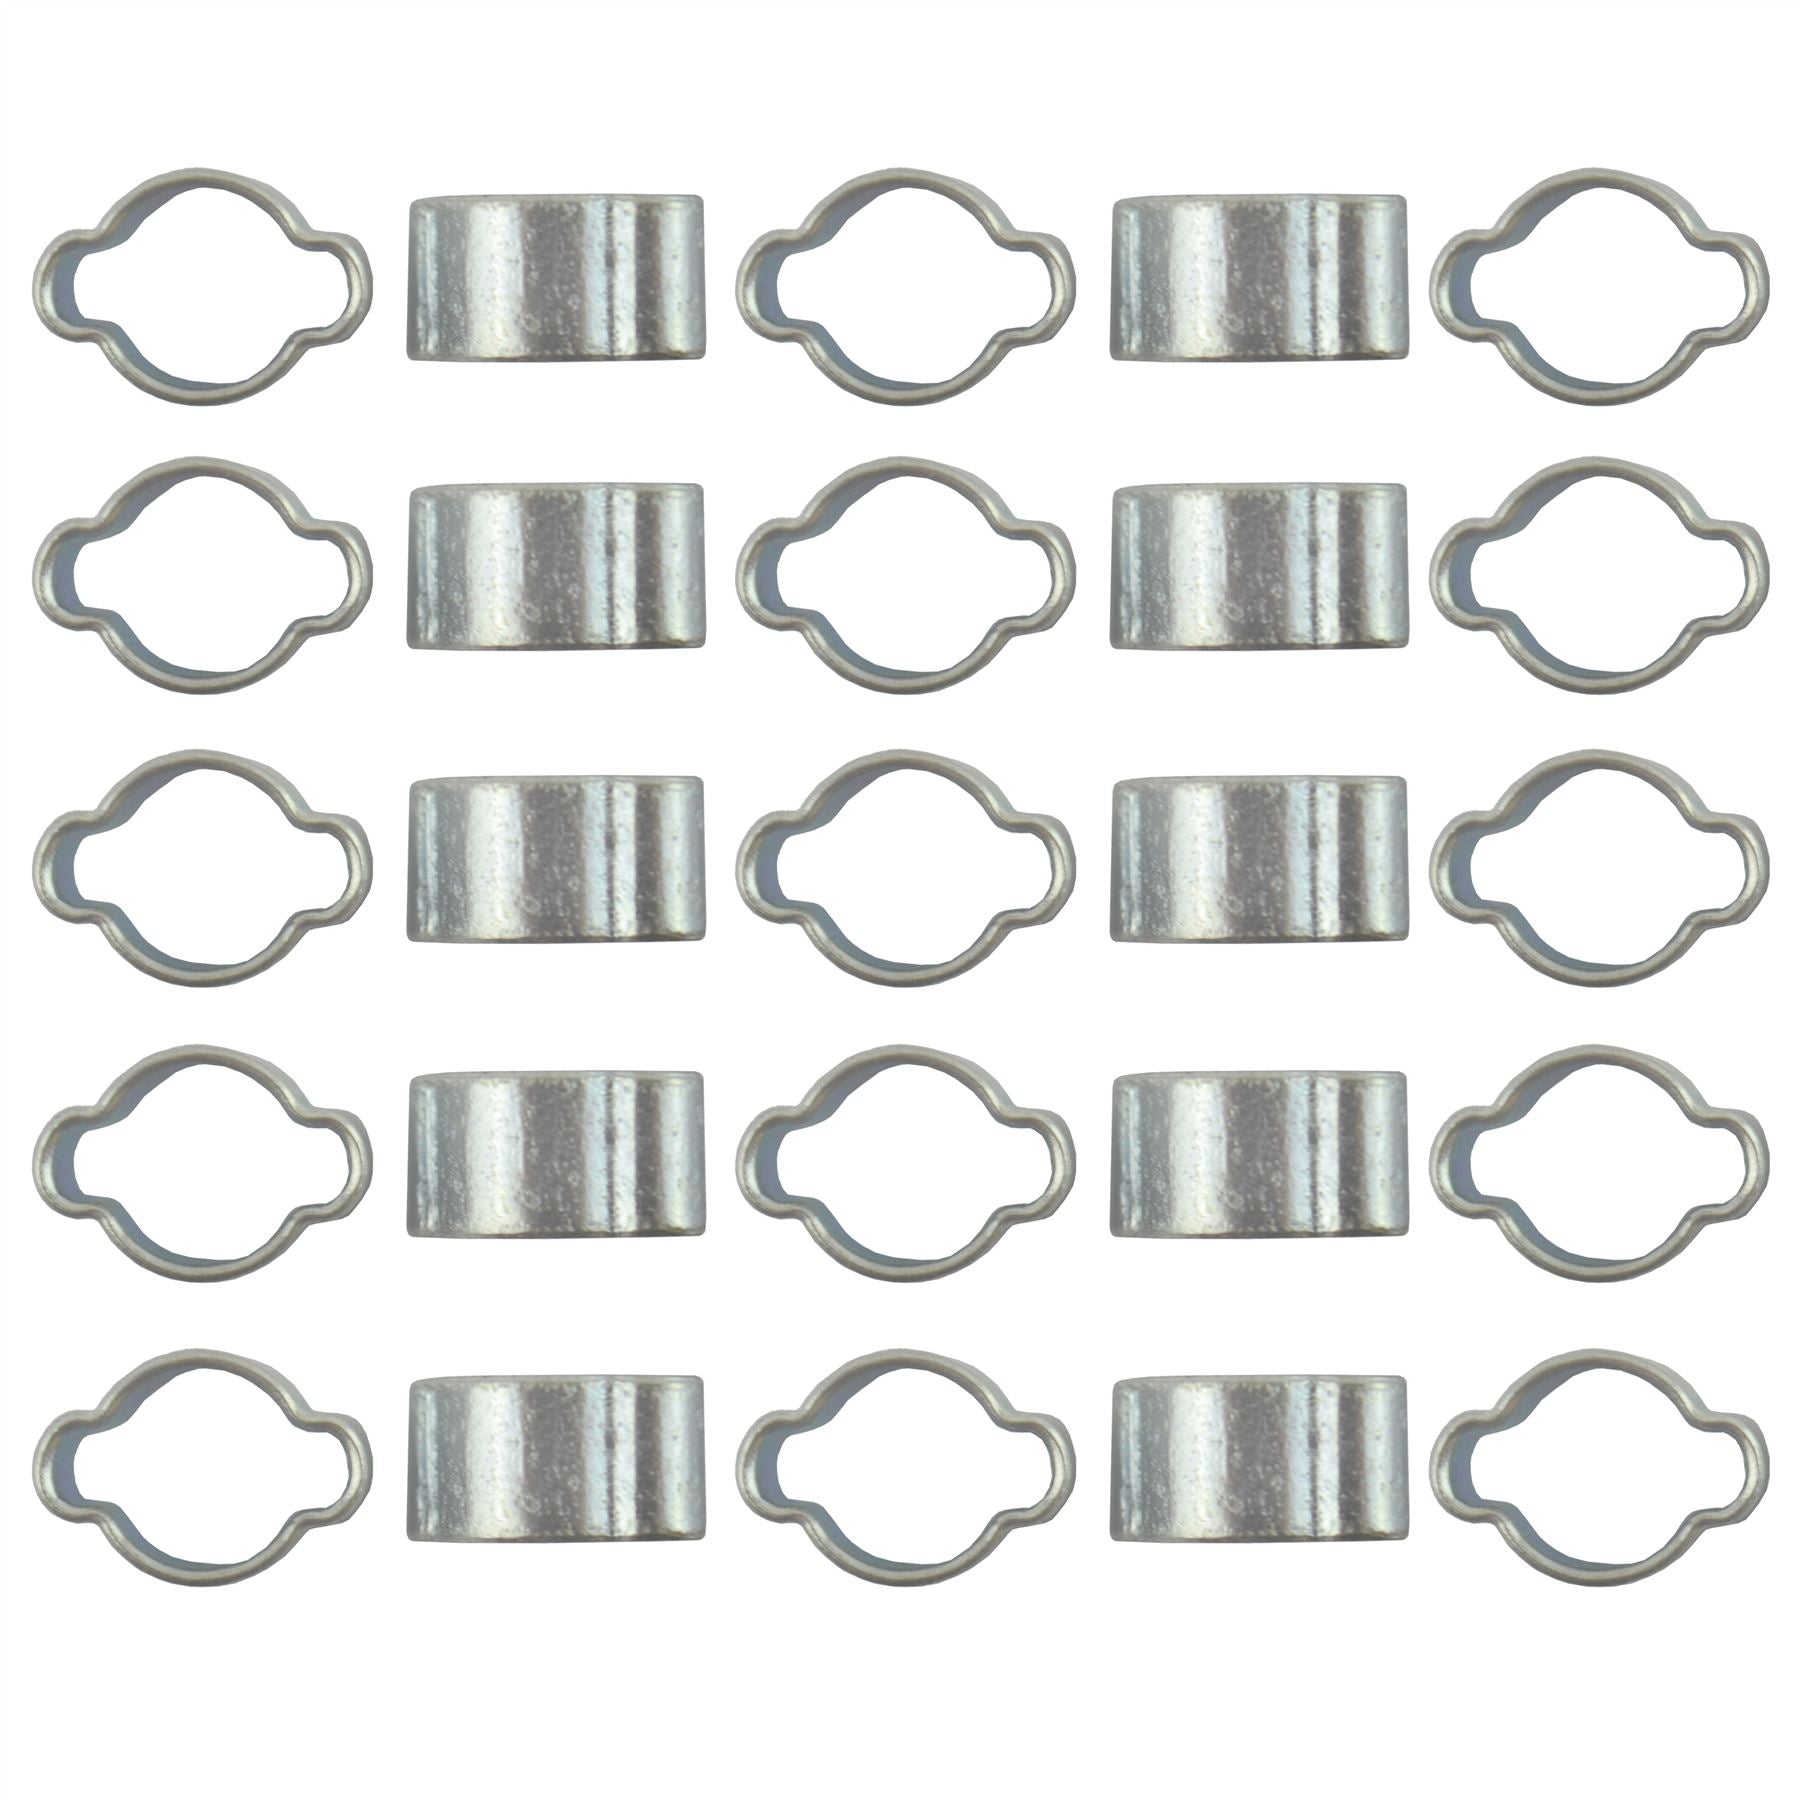 Double Ear Pipe Tube Clips Clamps Hose Fuel Clamp Hydraulic 5mm - 7mm 20pcs